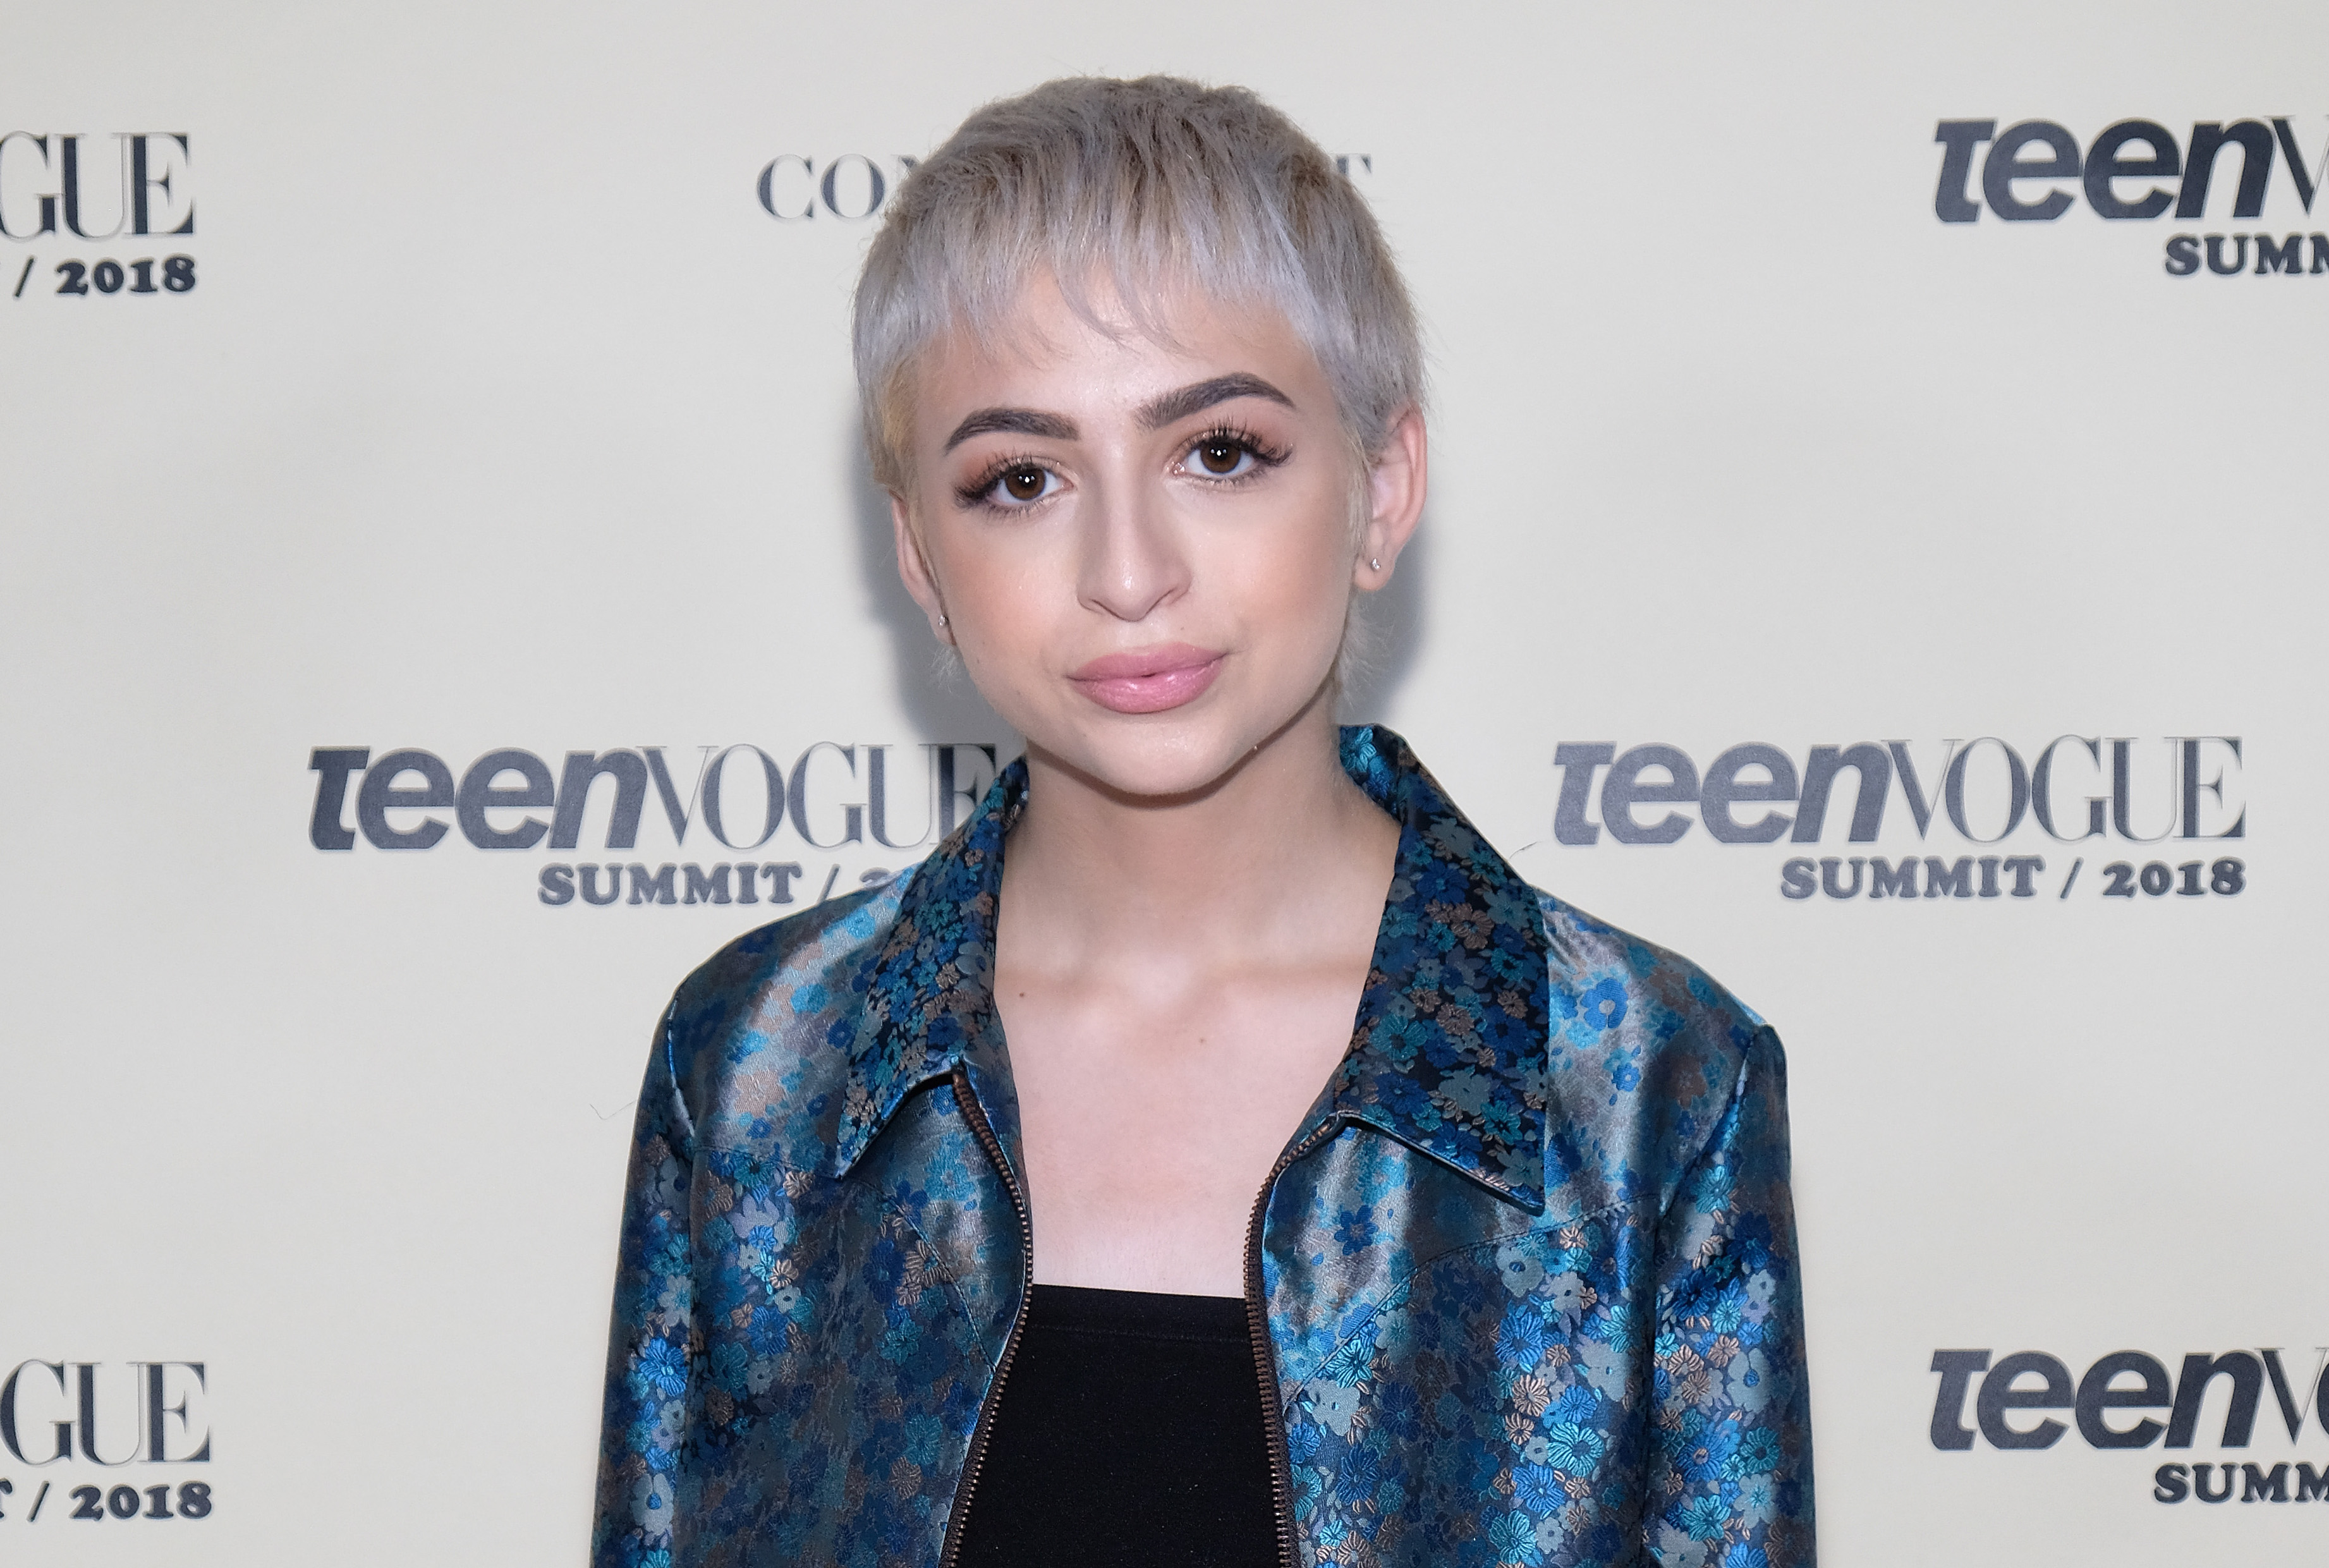 Trans actress Josie Totah says she was kicked out of school as she didn&apo...